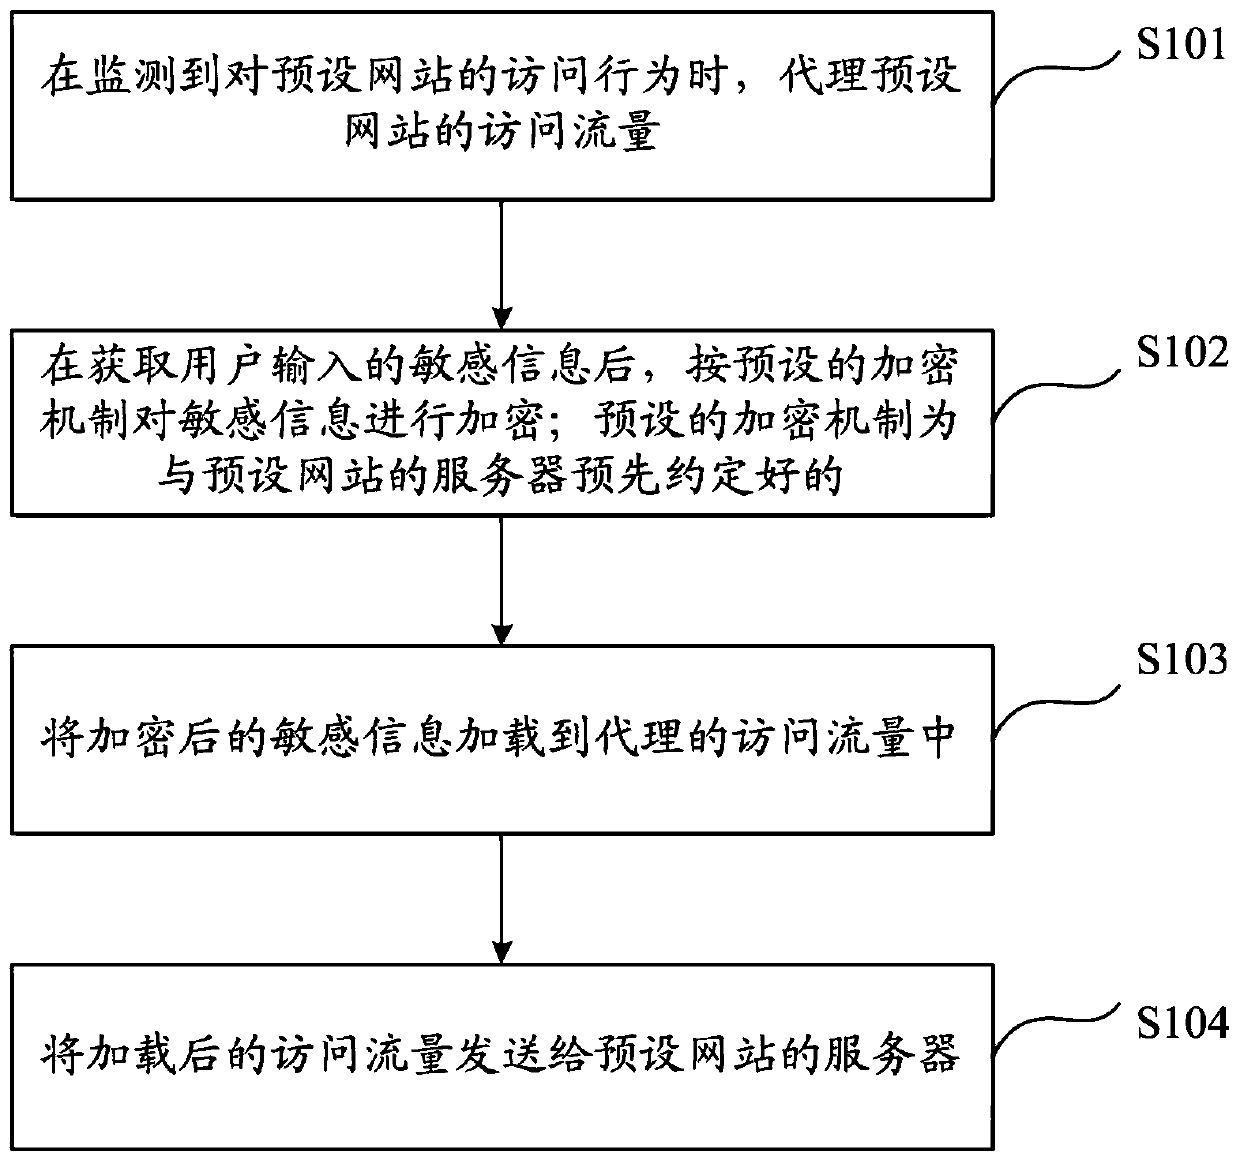 A method and device for protecting sensitive information input from a web page